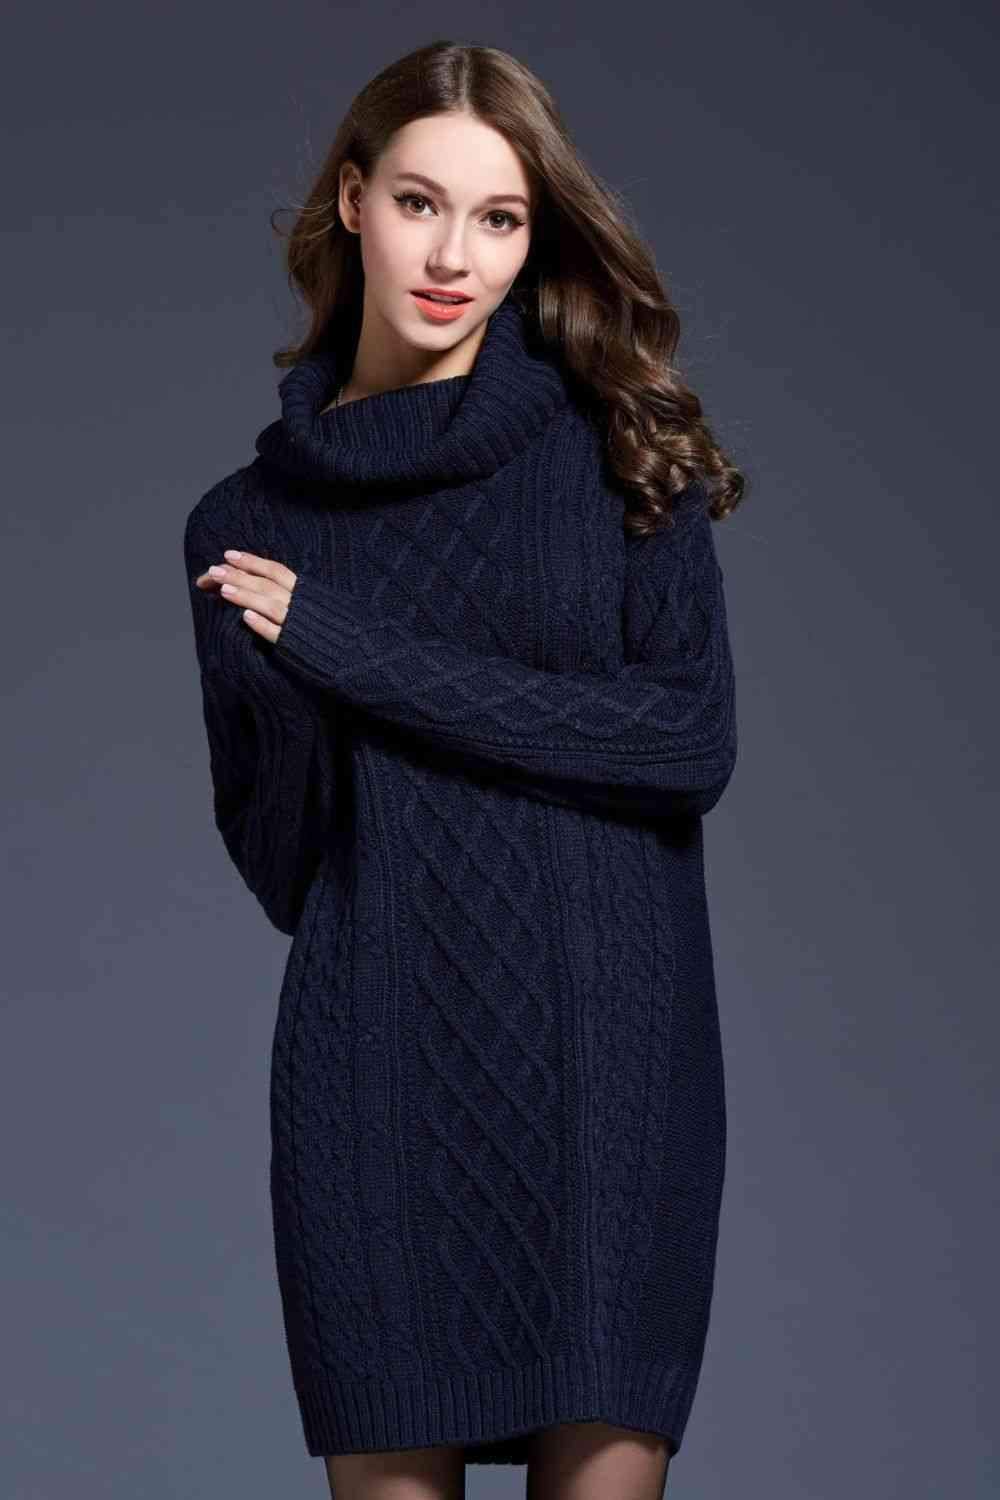 Woven Right Full Size Mixed Knit Cowl Neck Dropped Shoulder Sweater Dress Navy